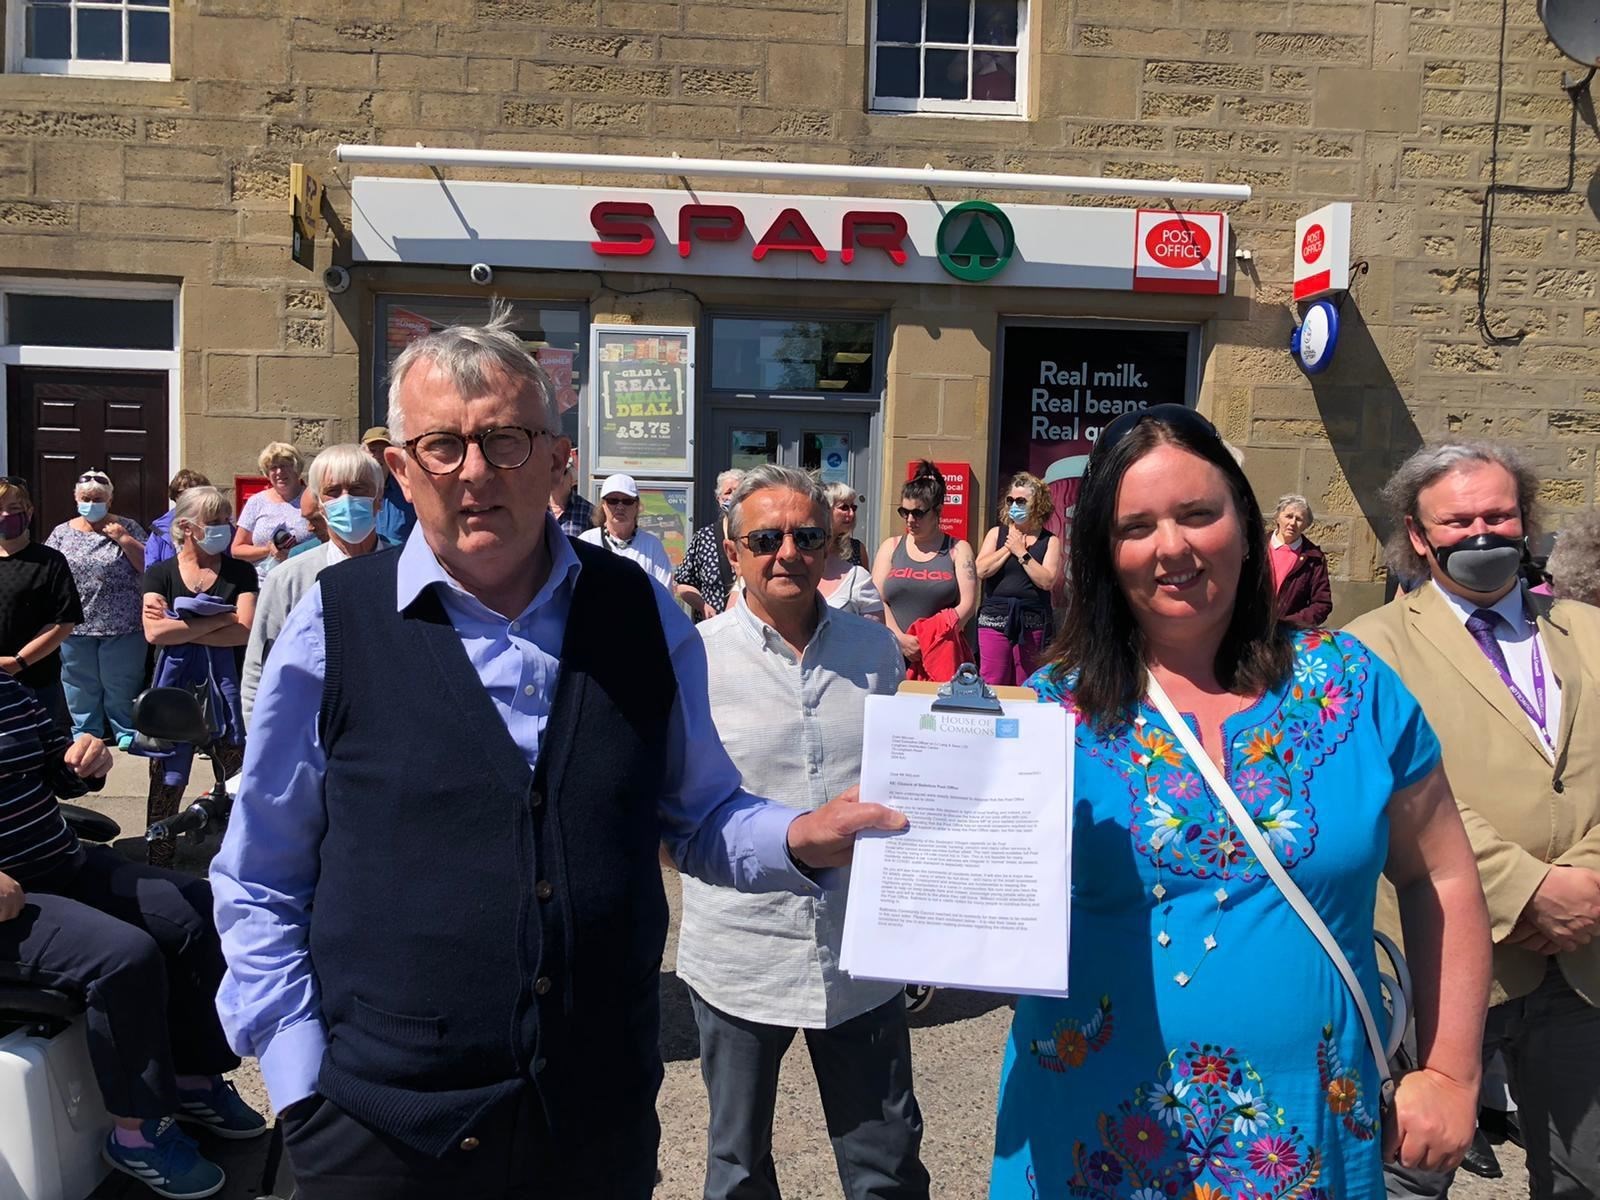 Balintore residents campaigned earlier this summer in a bid to prevent the closure of their local post office.